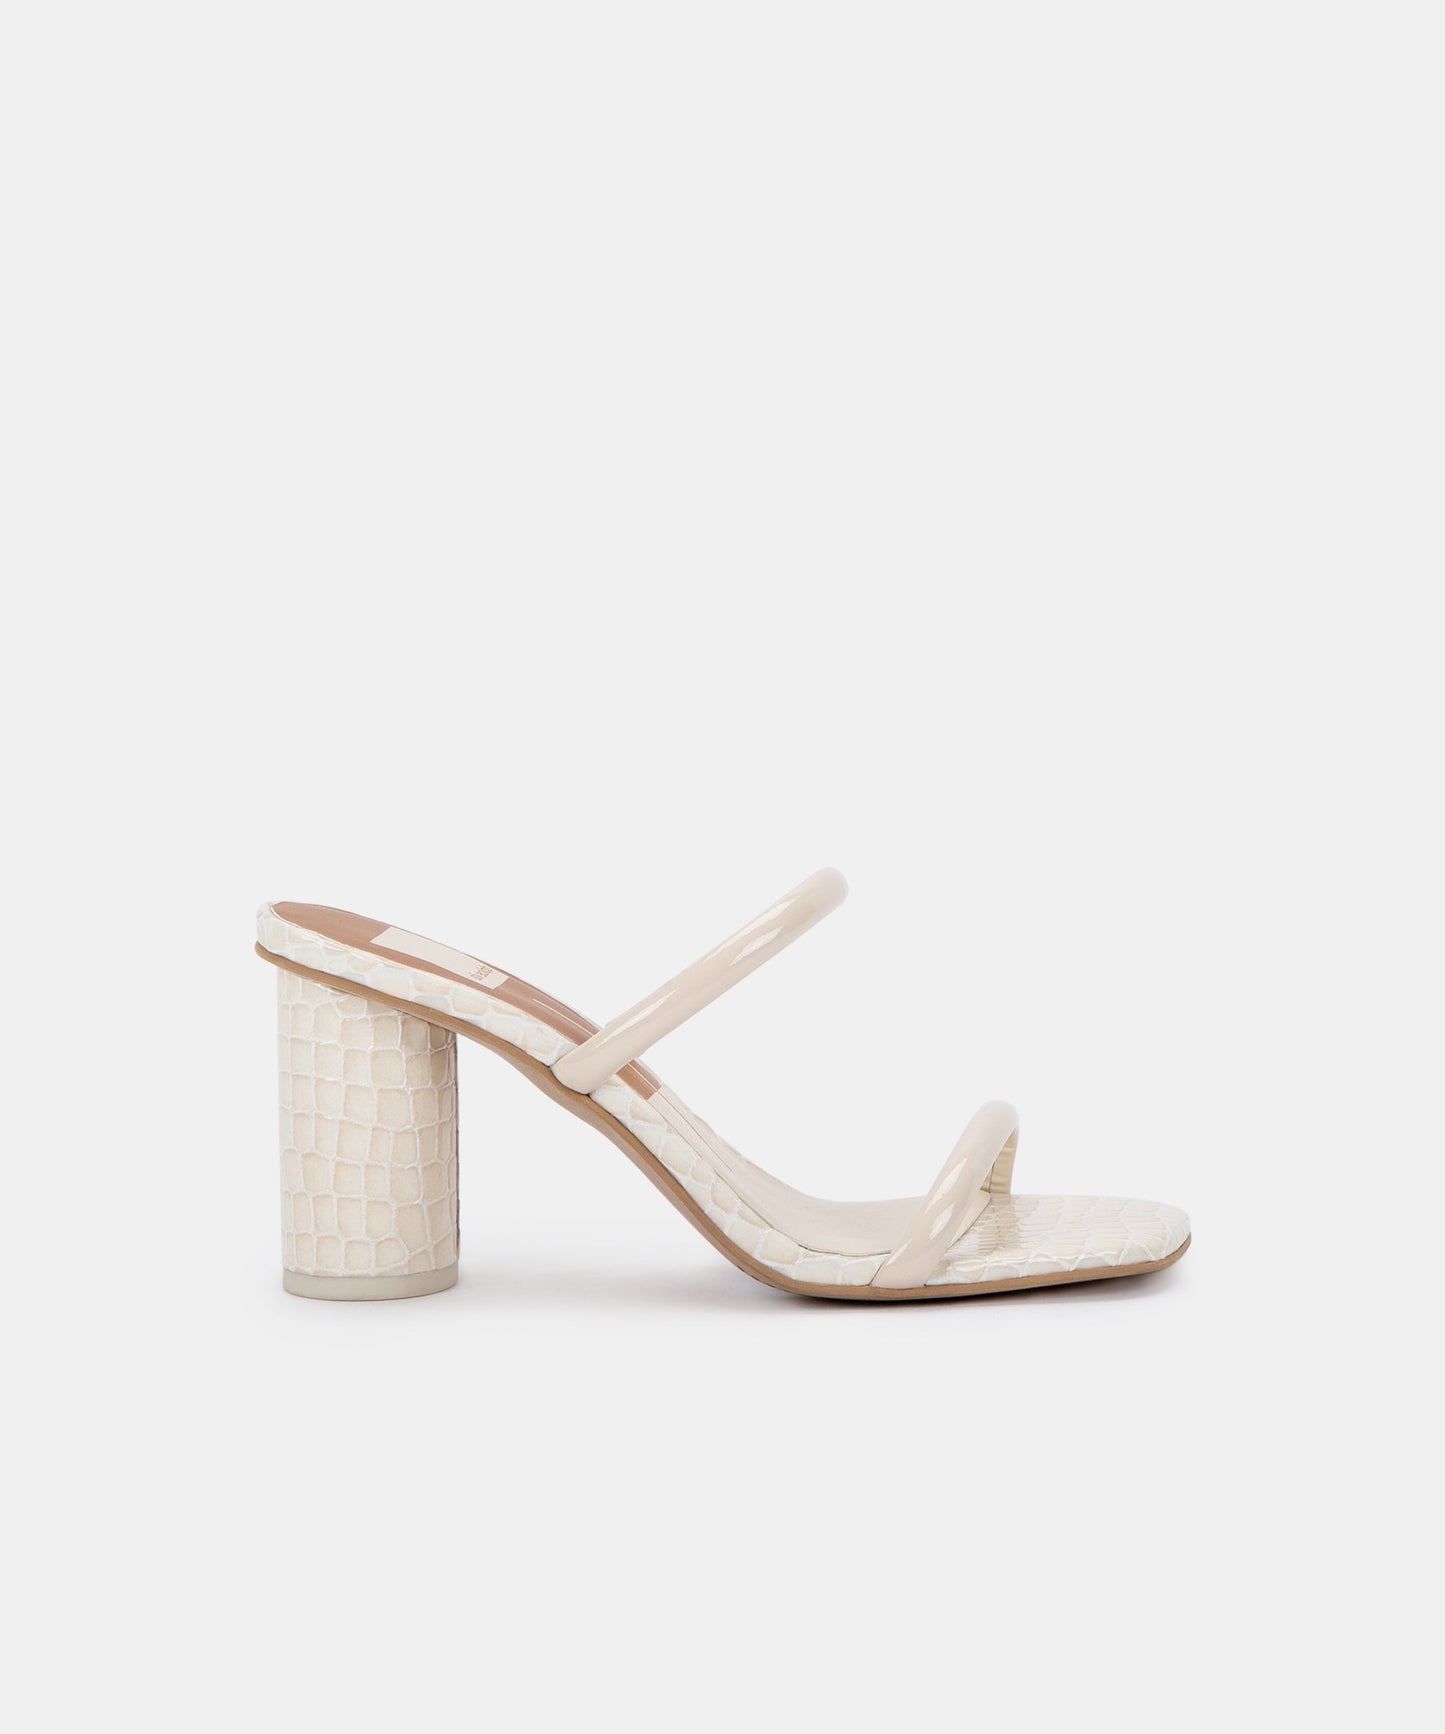 NOLES WIDE HEELS IN IVORY PATENT CROCO LEATHER -   Dolce Vita